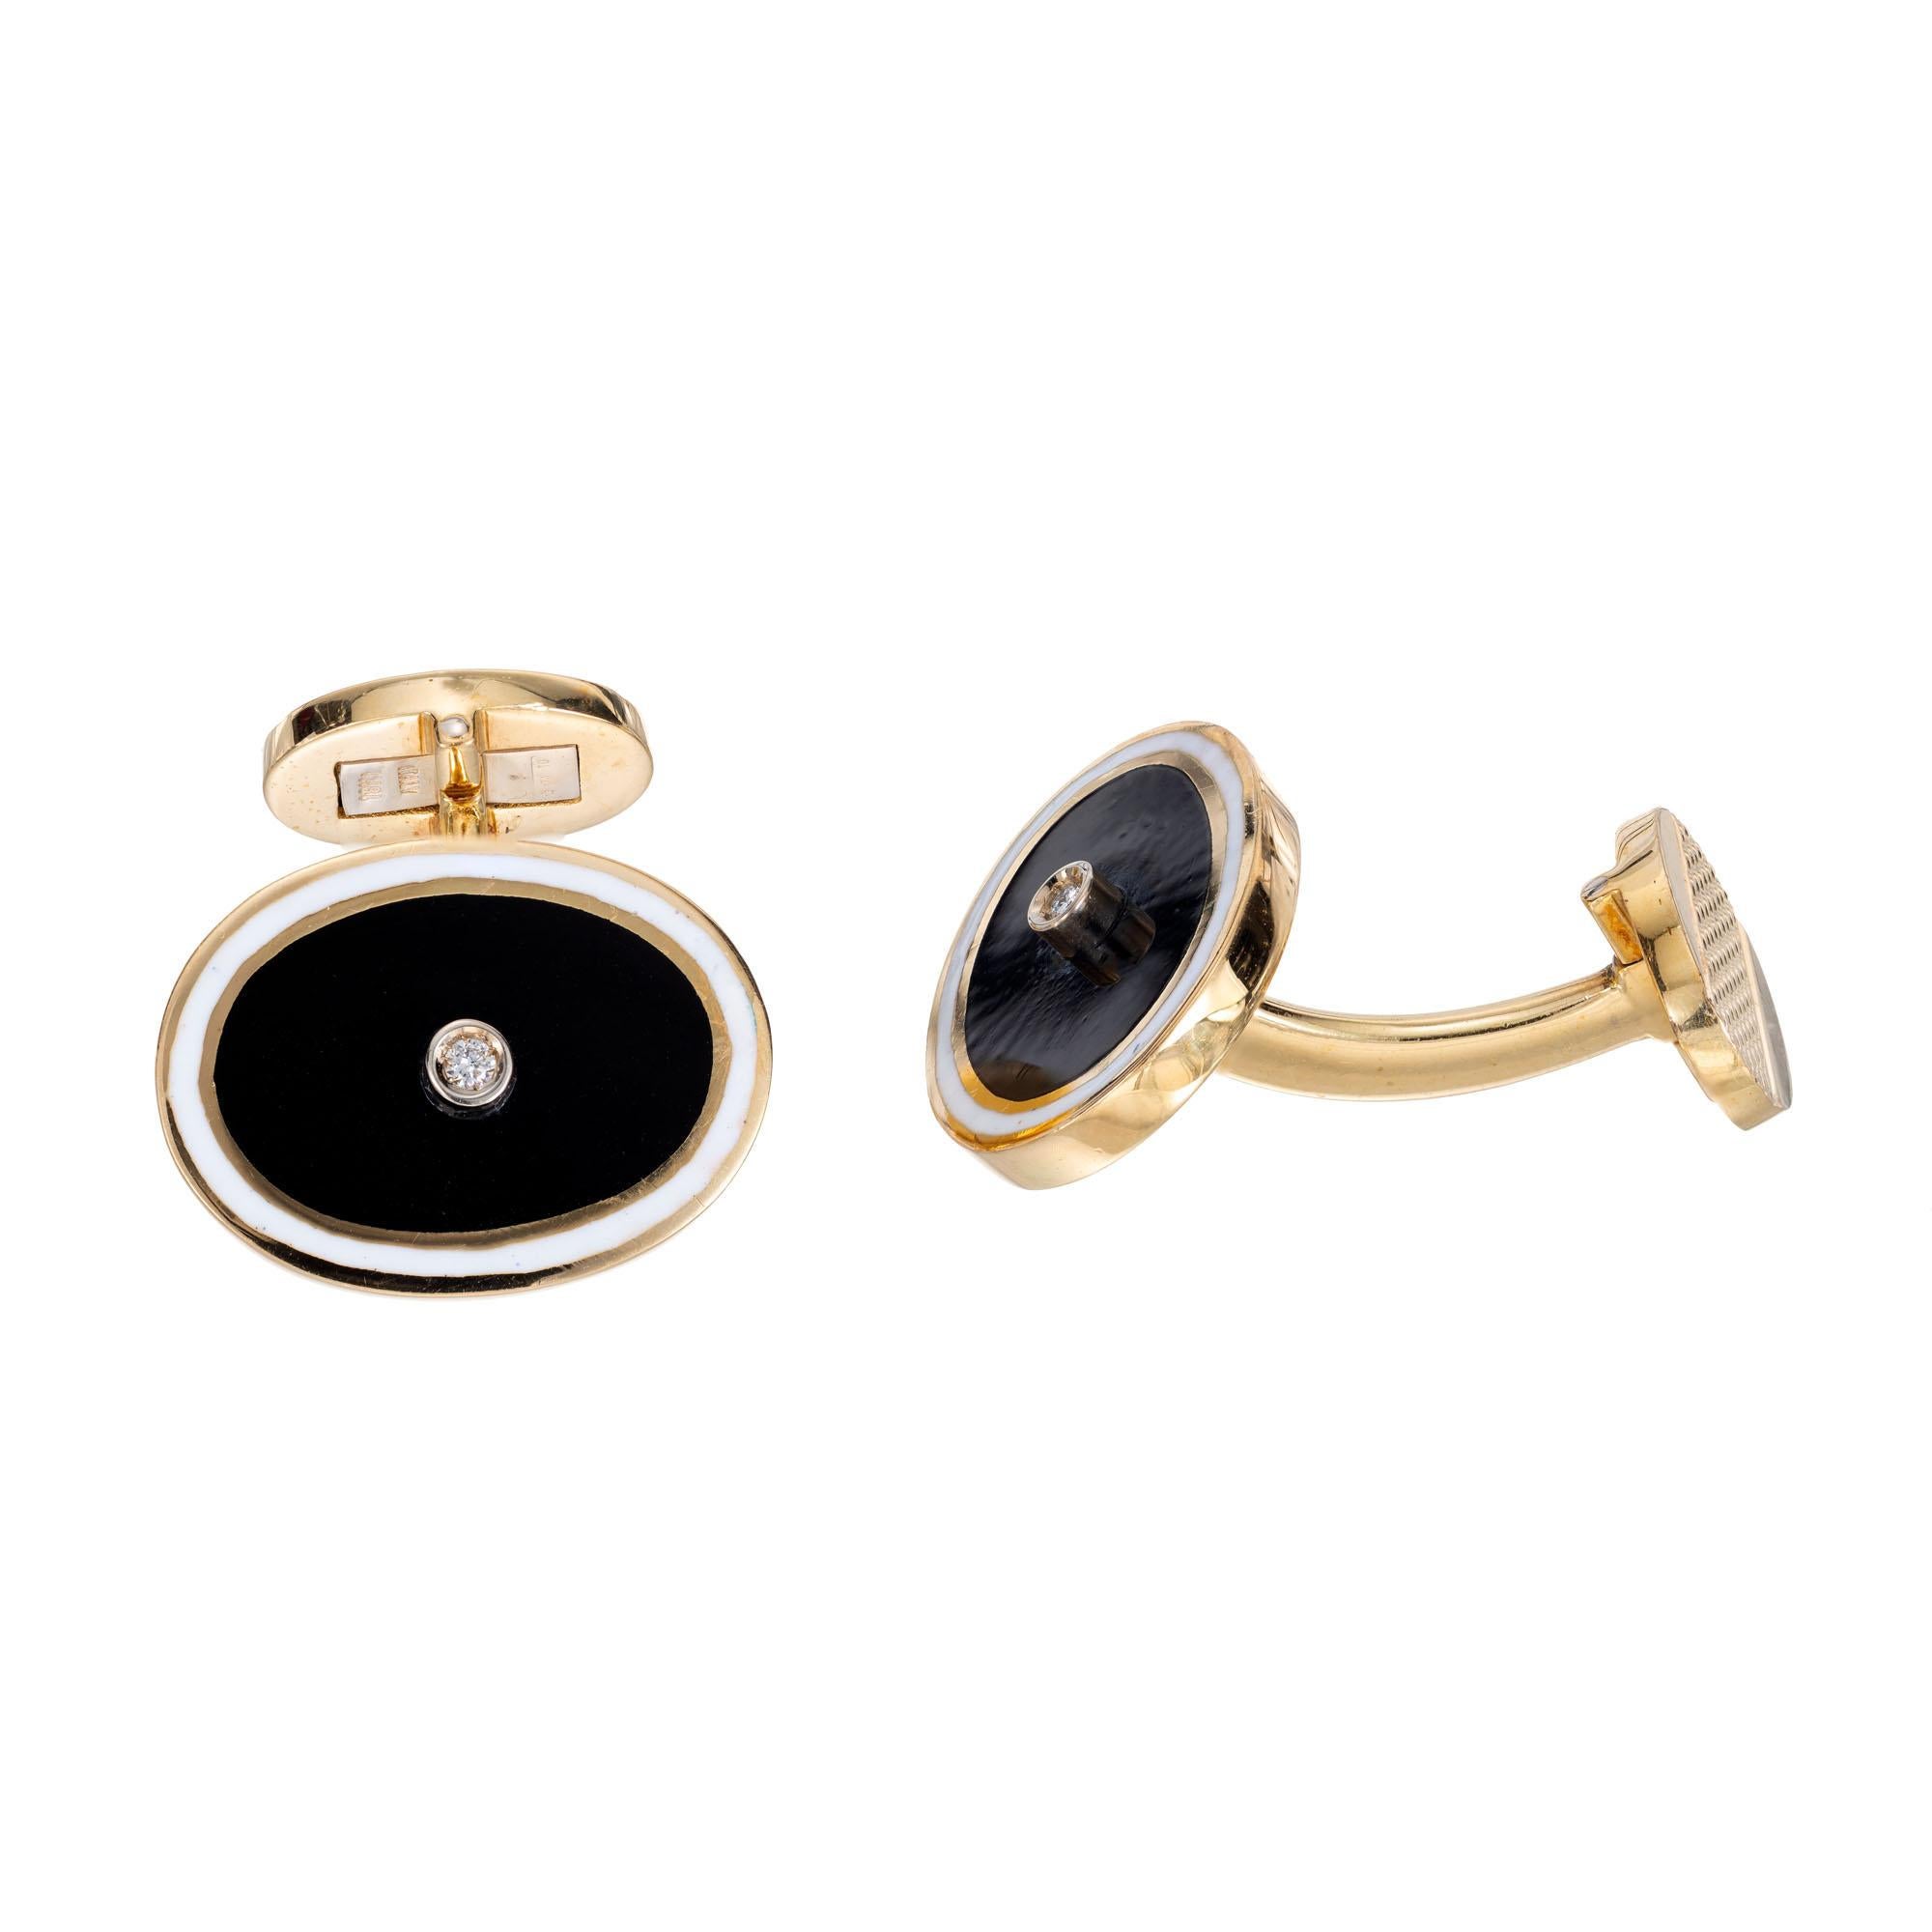  Vintage 1960's 18k yellow gold double sided cuff links, clip back style with black and white enamel fronts with a full cut Diamond center. Made in Italy.

18k 2-tone gold 
2 round Diamonds, approx. total weight.04cts 
Top to bottom: 14.01mm or .55